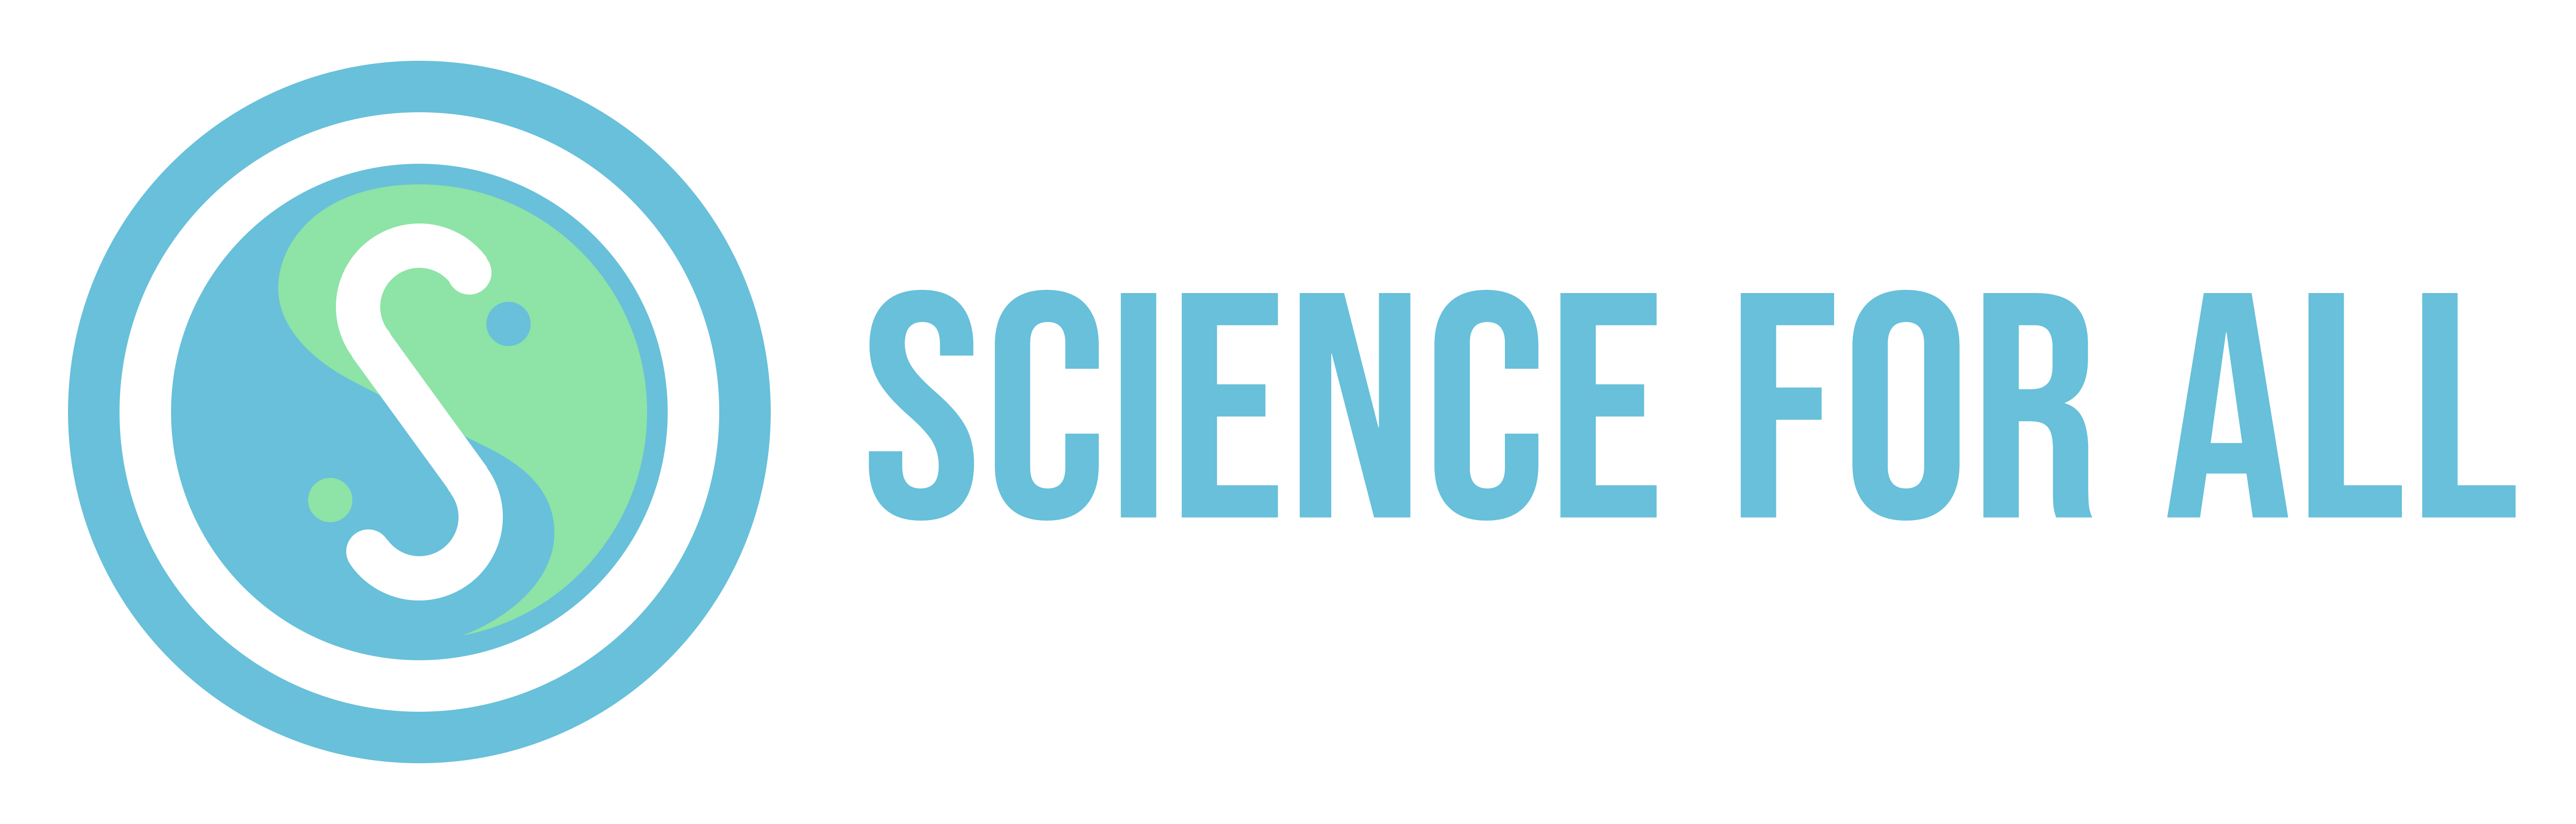 Science for All logo